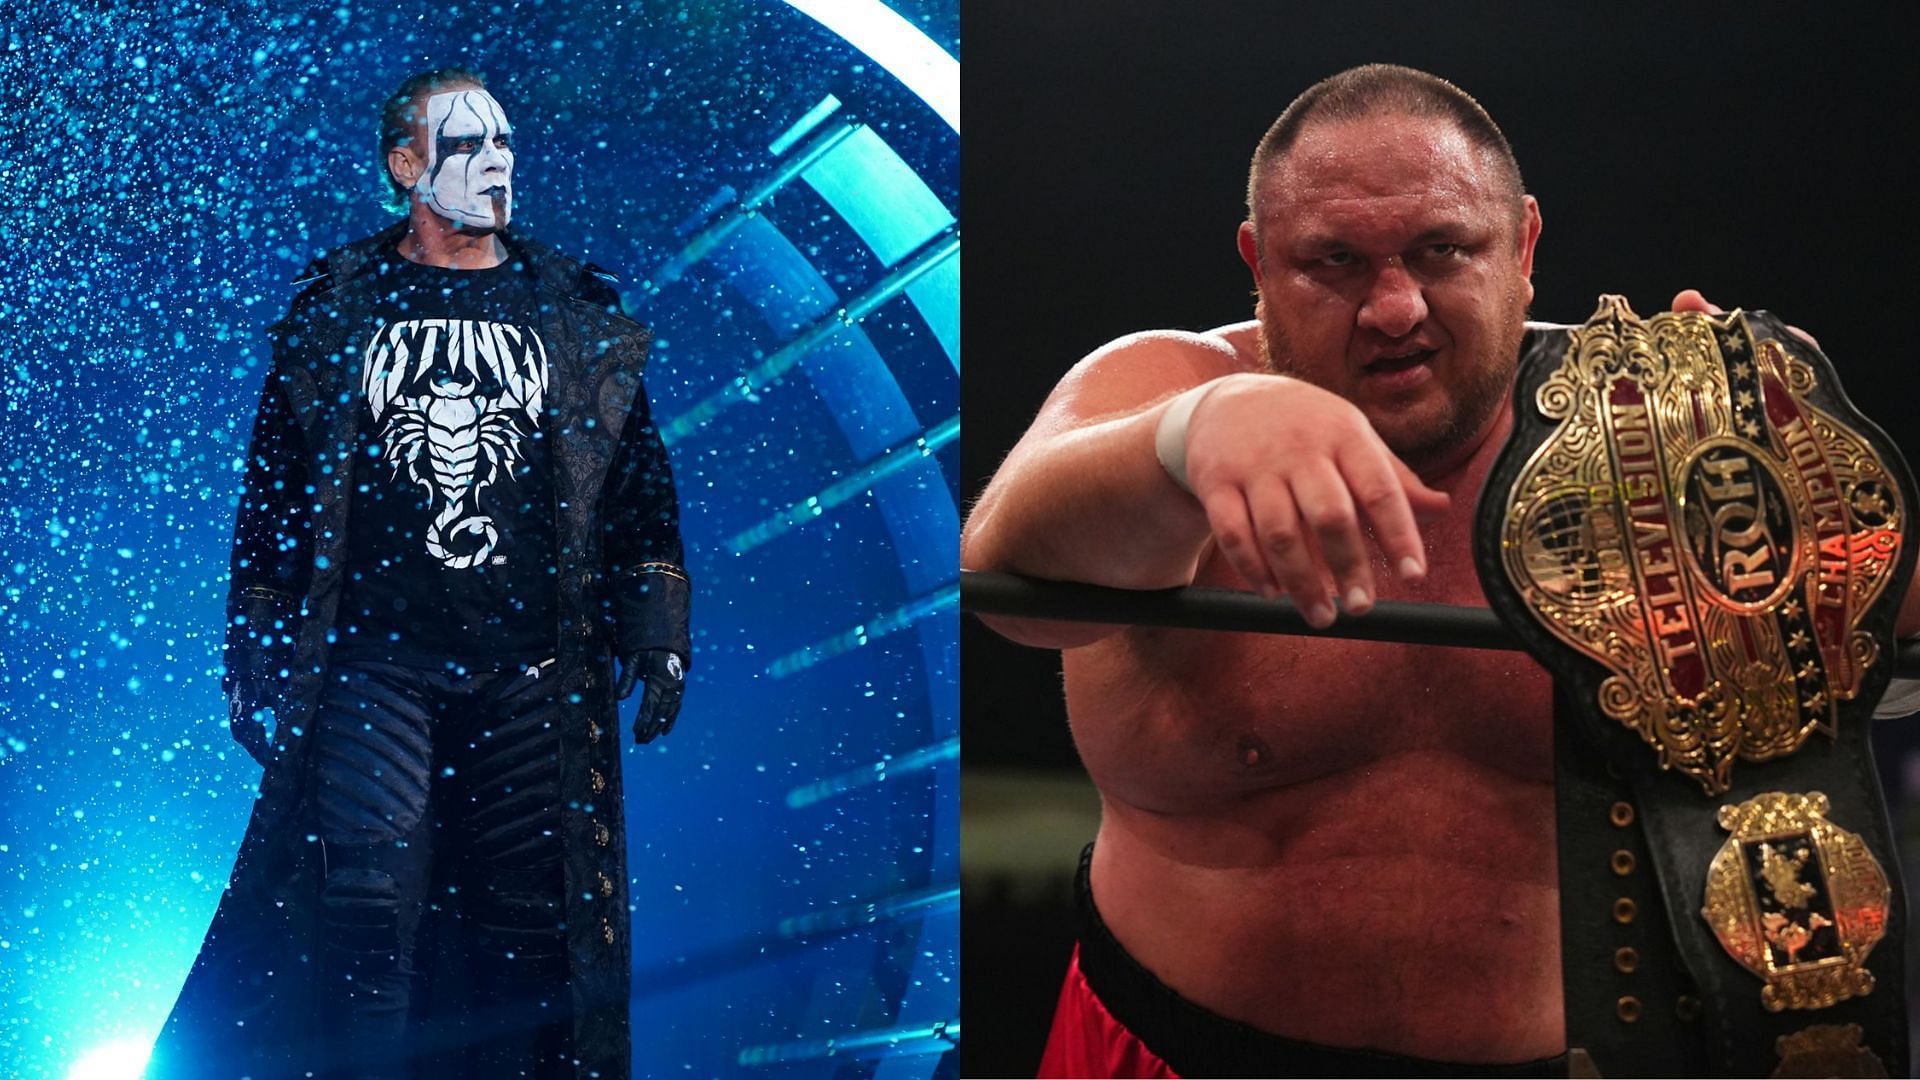 Sting and Samoa Joe are currently signed to AEW